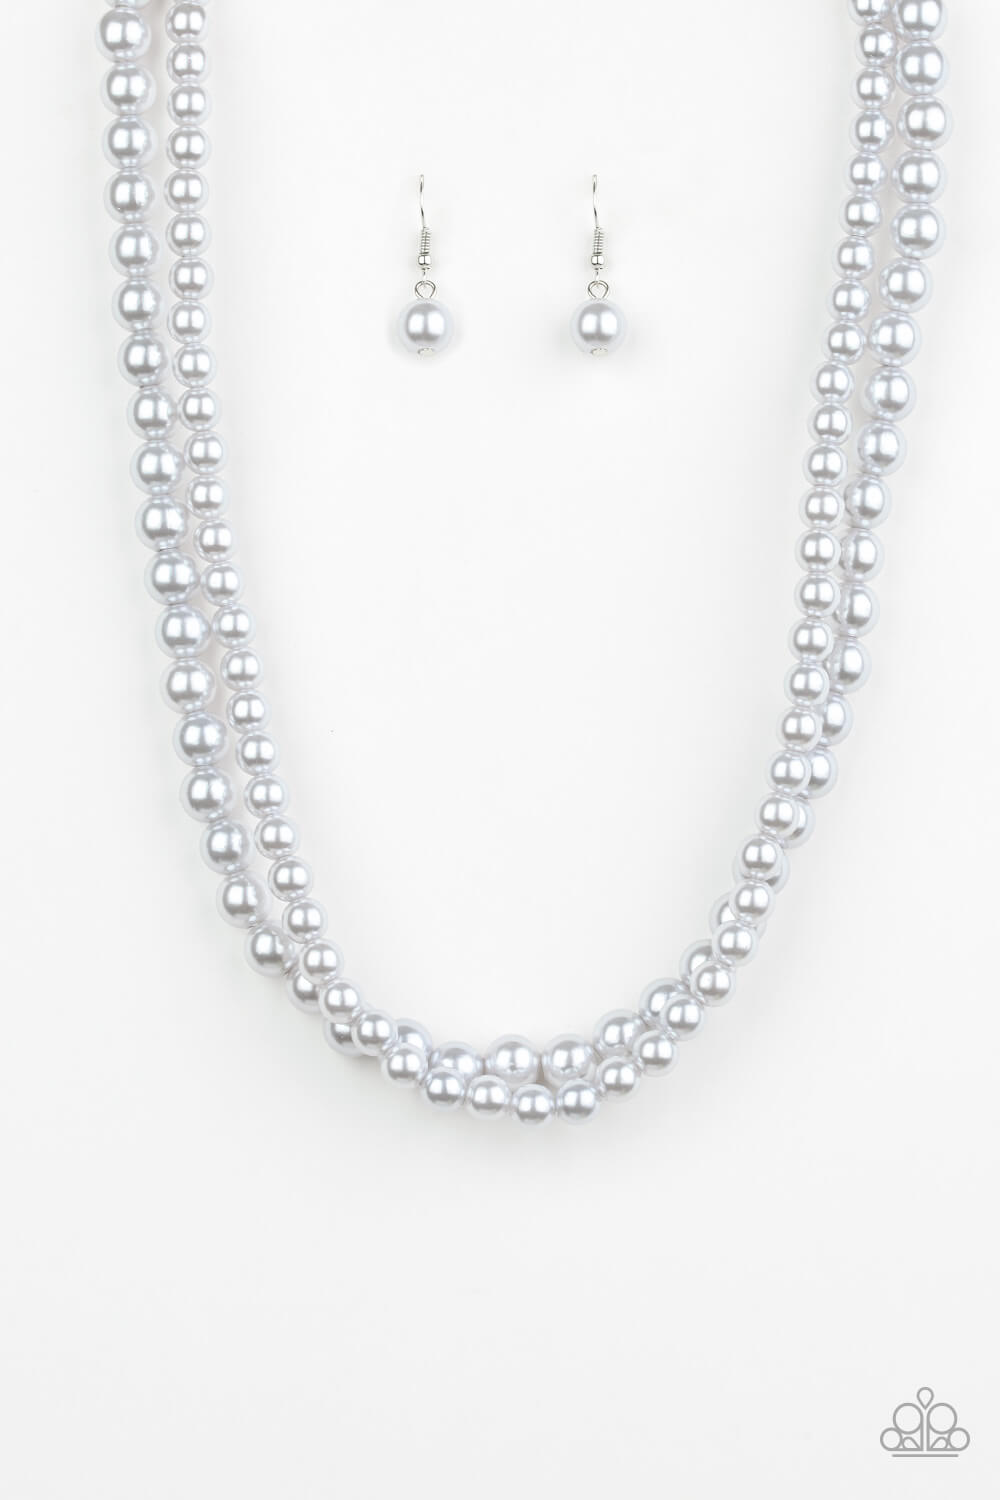 Woman Of The Century - Silver Necklace Set - Princess Glam Shop